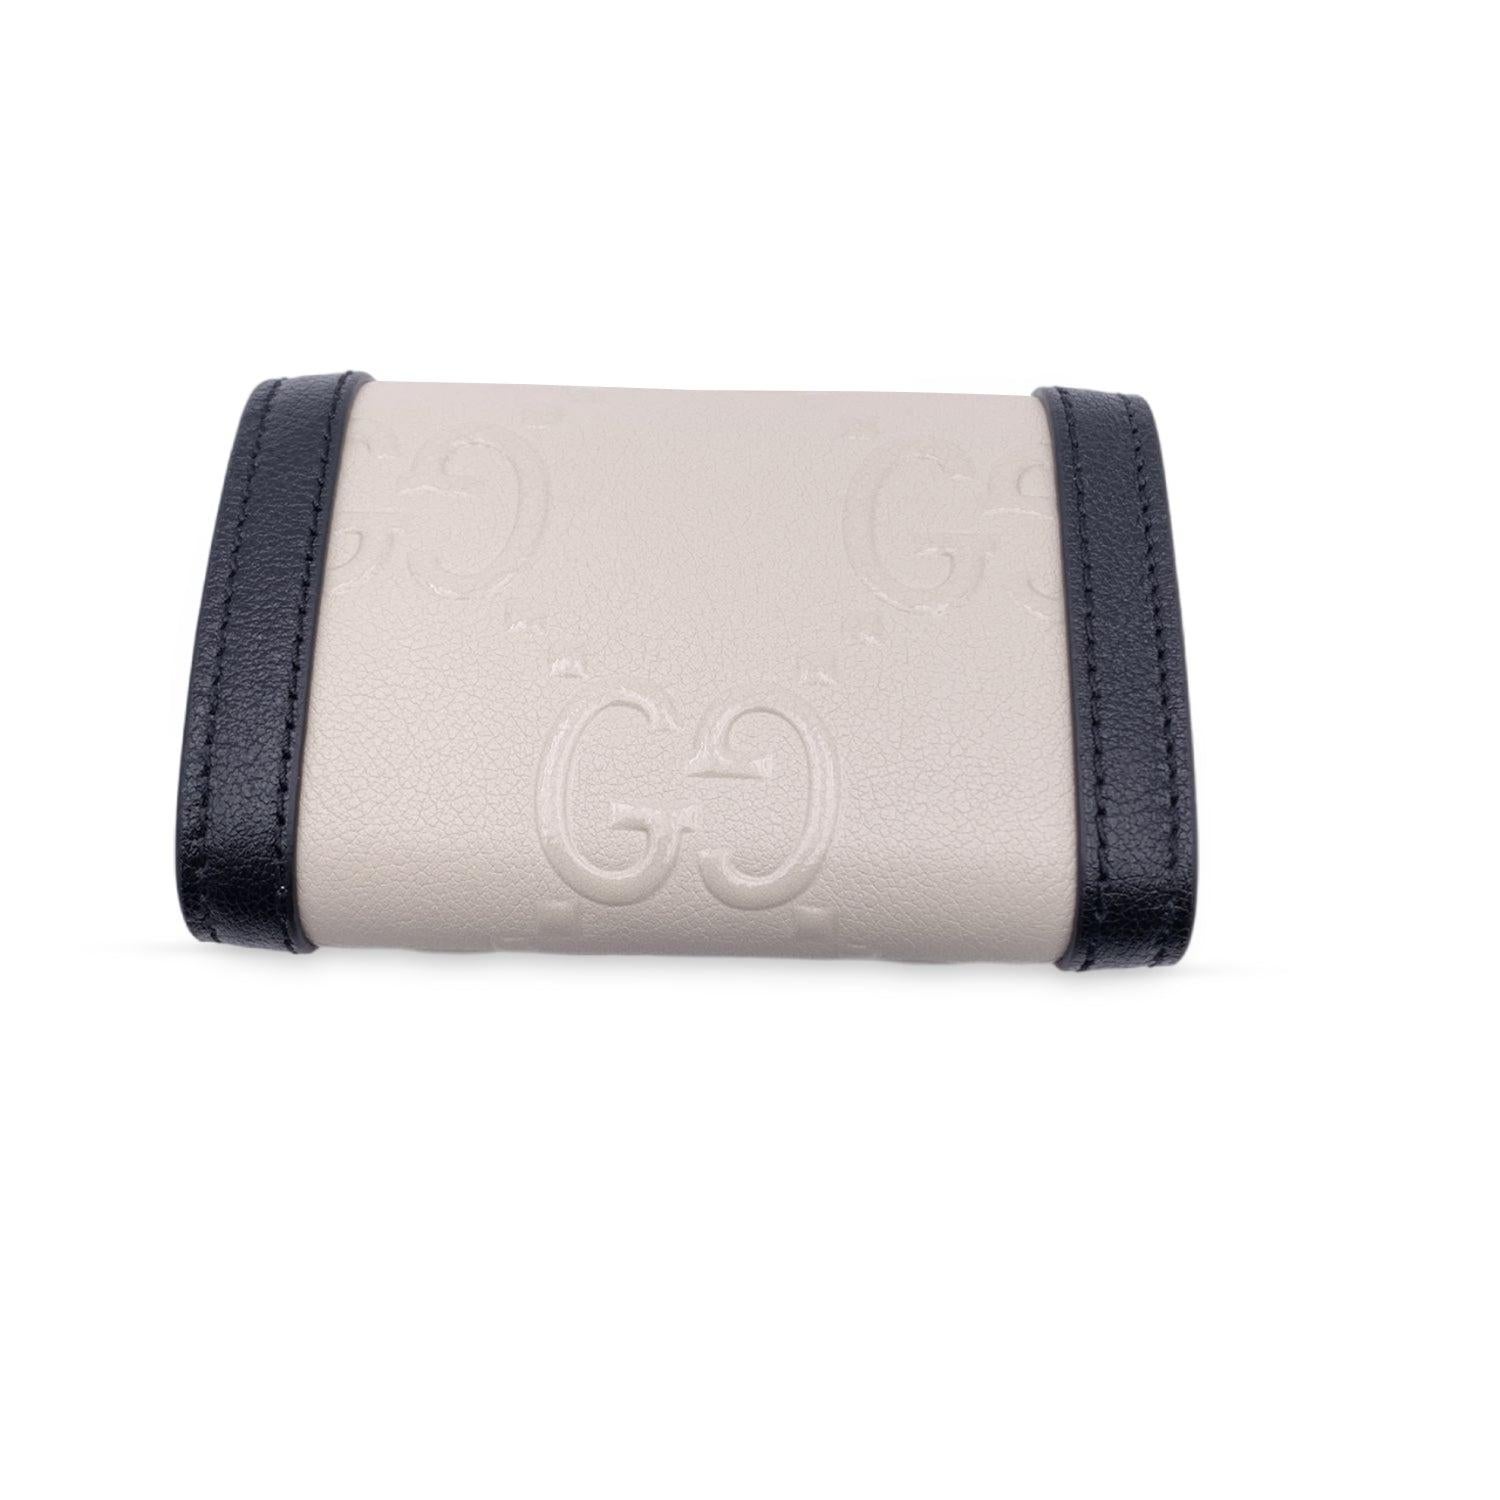 Gucci 'Wonka' Key case in black and white embossed monogram leather. Gold metal hardware. Snap closure on the front. Leather lining. 6 key rings inside. 'Gucci - Made in Italy' embossed inside. Retail price is 410 Euros Details MATERIAL: Leather